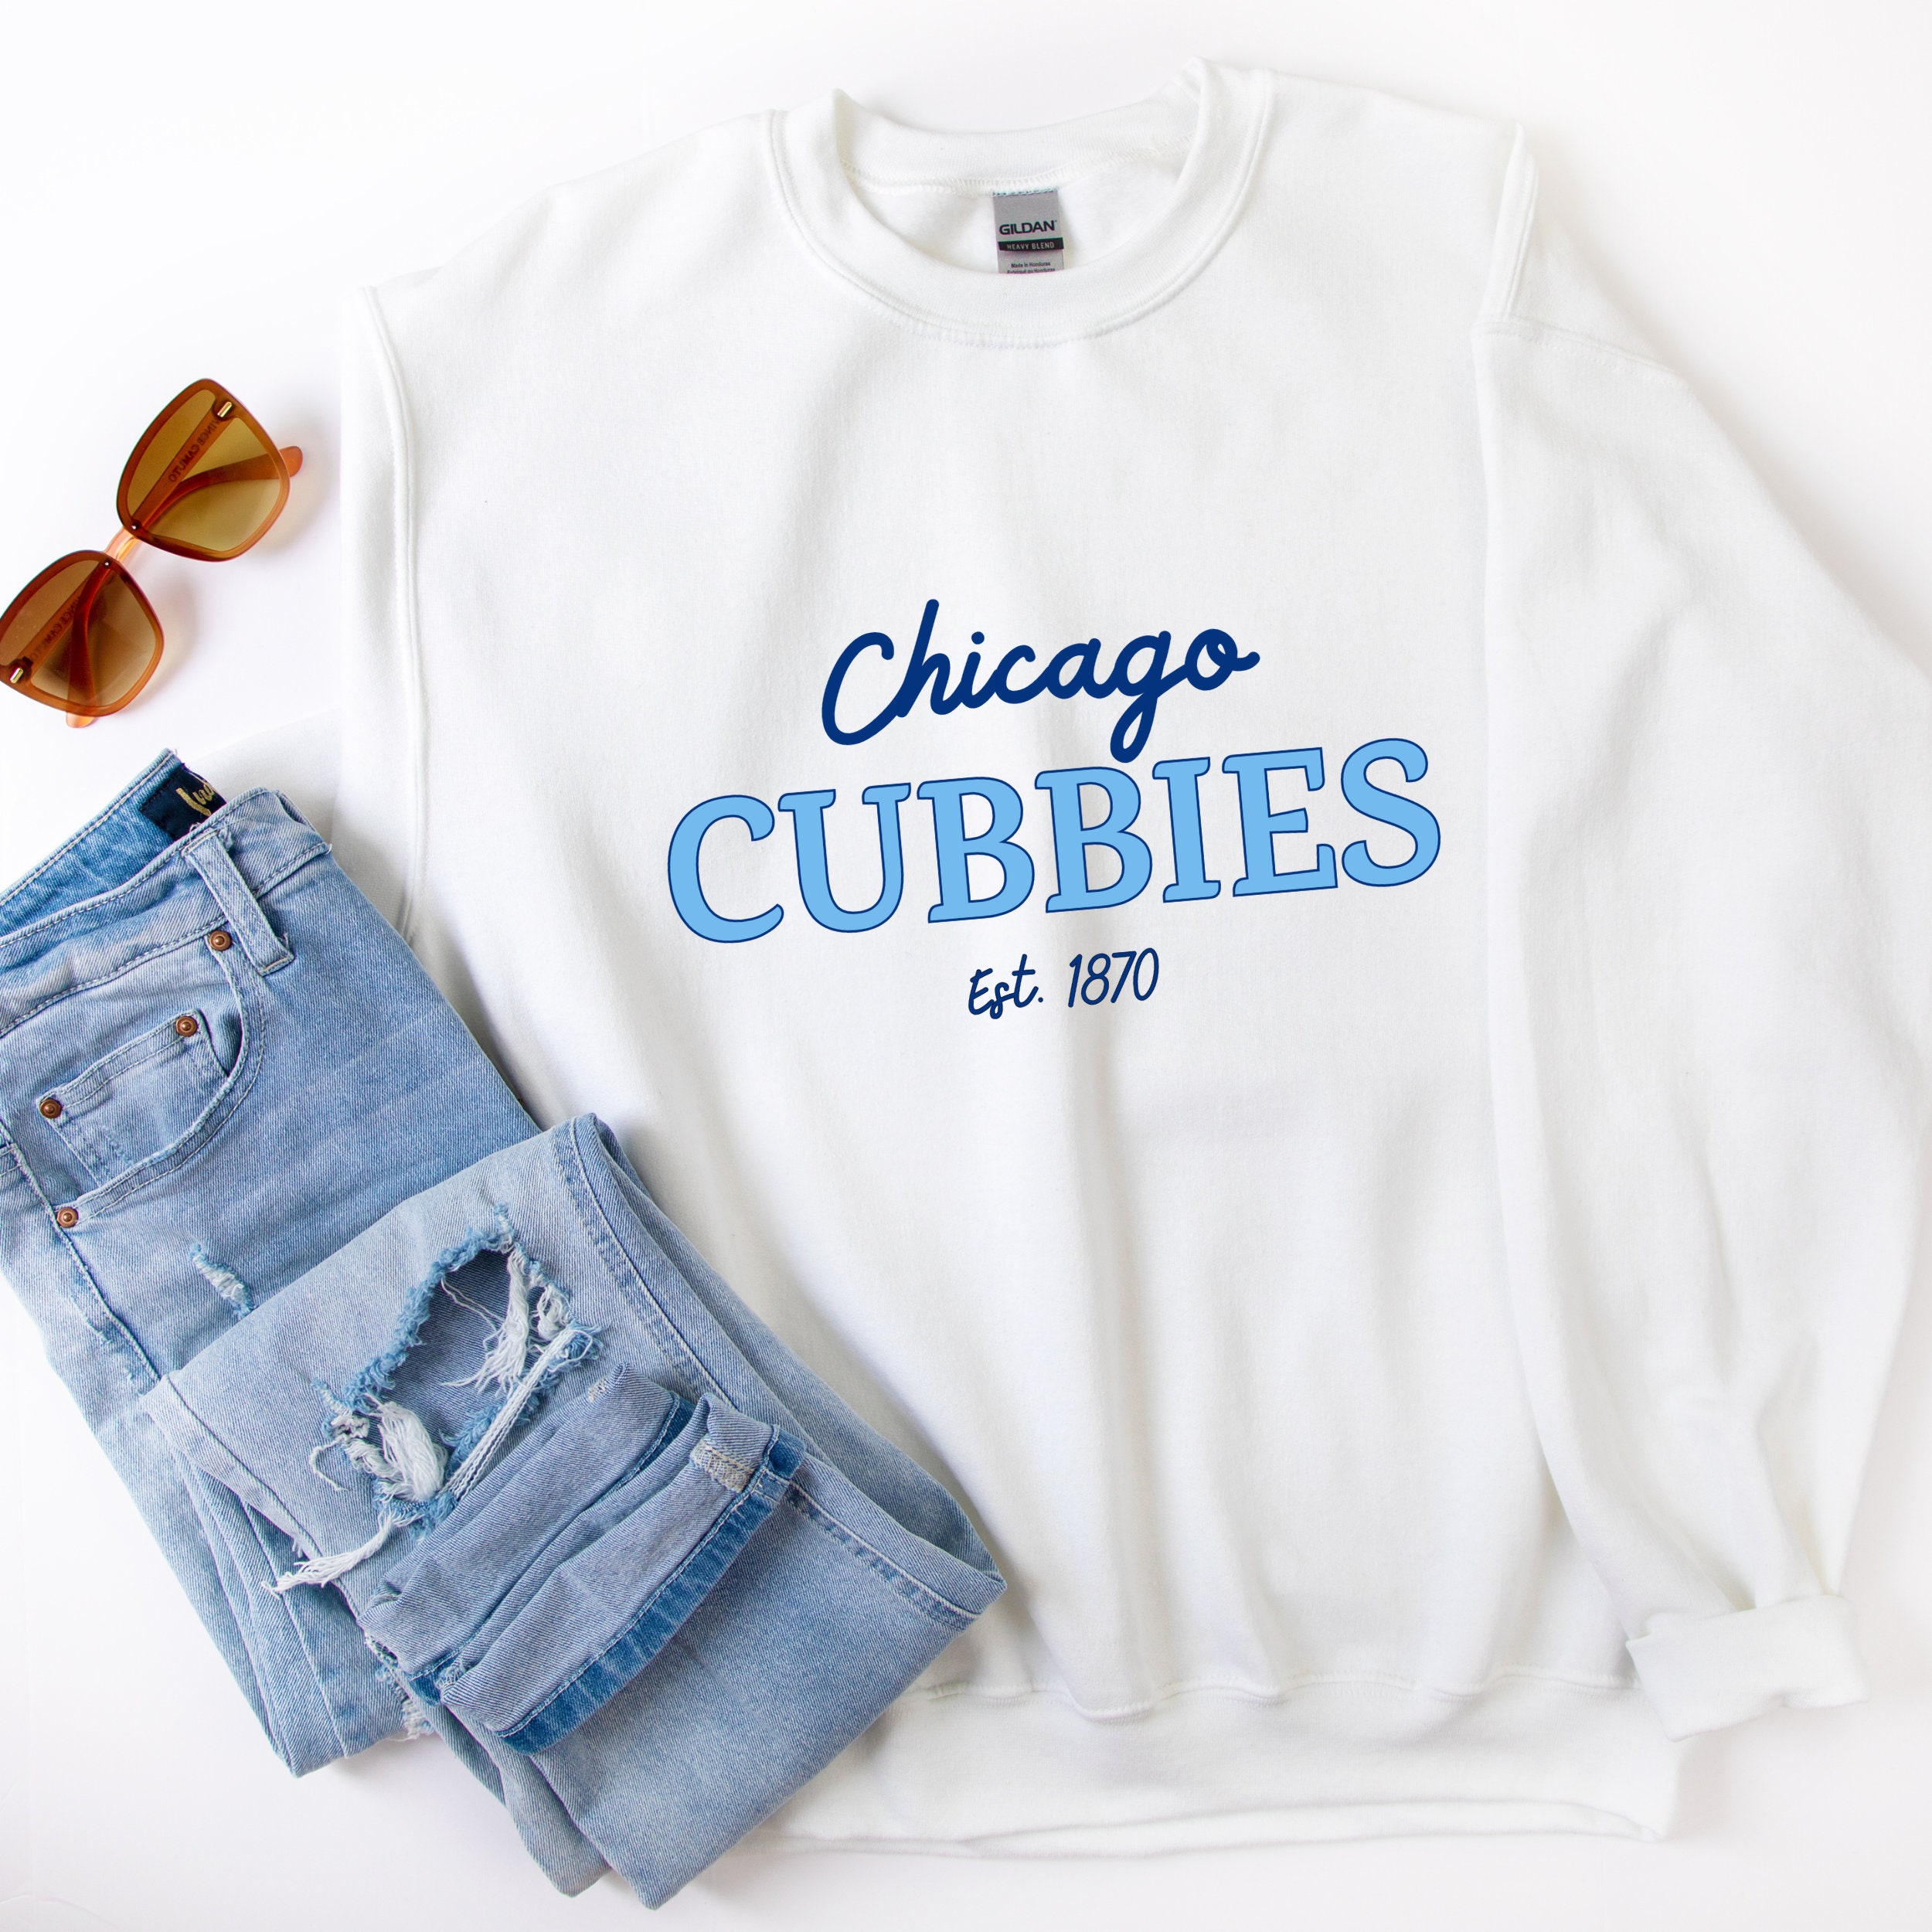 Men's Chicago Cubs Heather Gray Hometown Collection Cubbies T